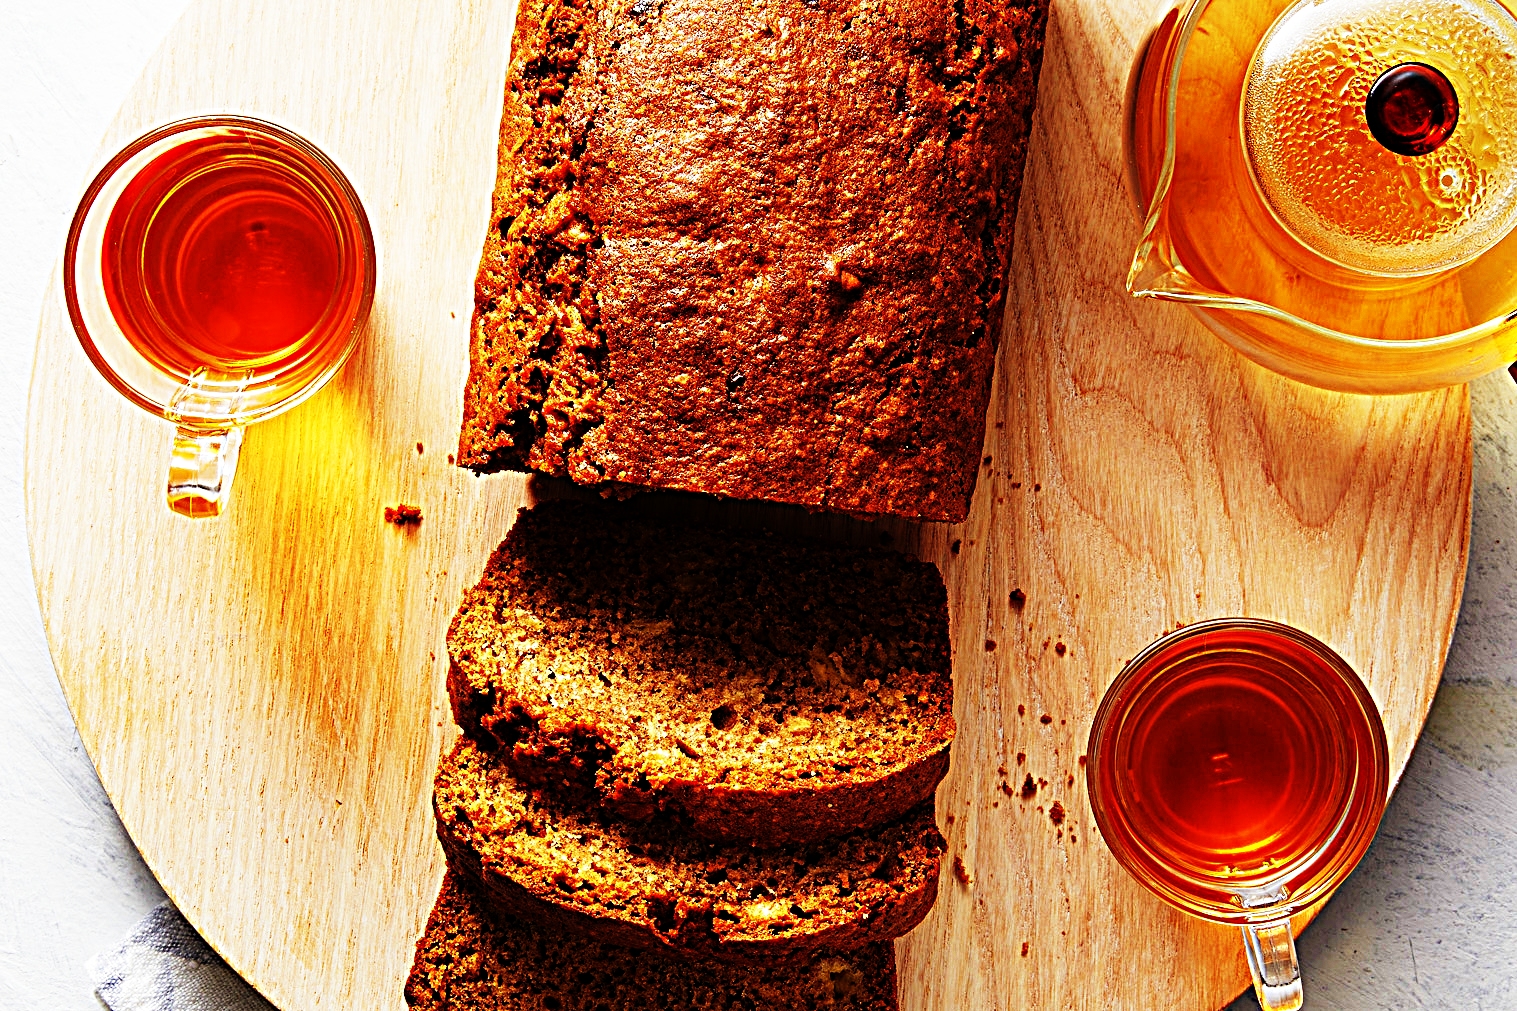 Stupid-Easy Recipe for Banana Bread (#1 Top-Rated)